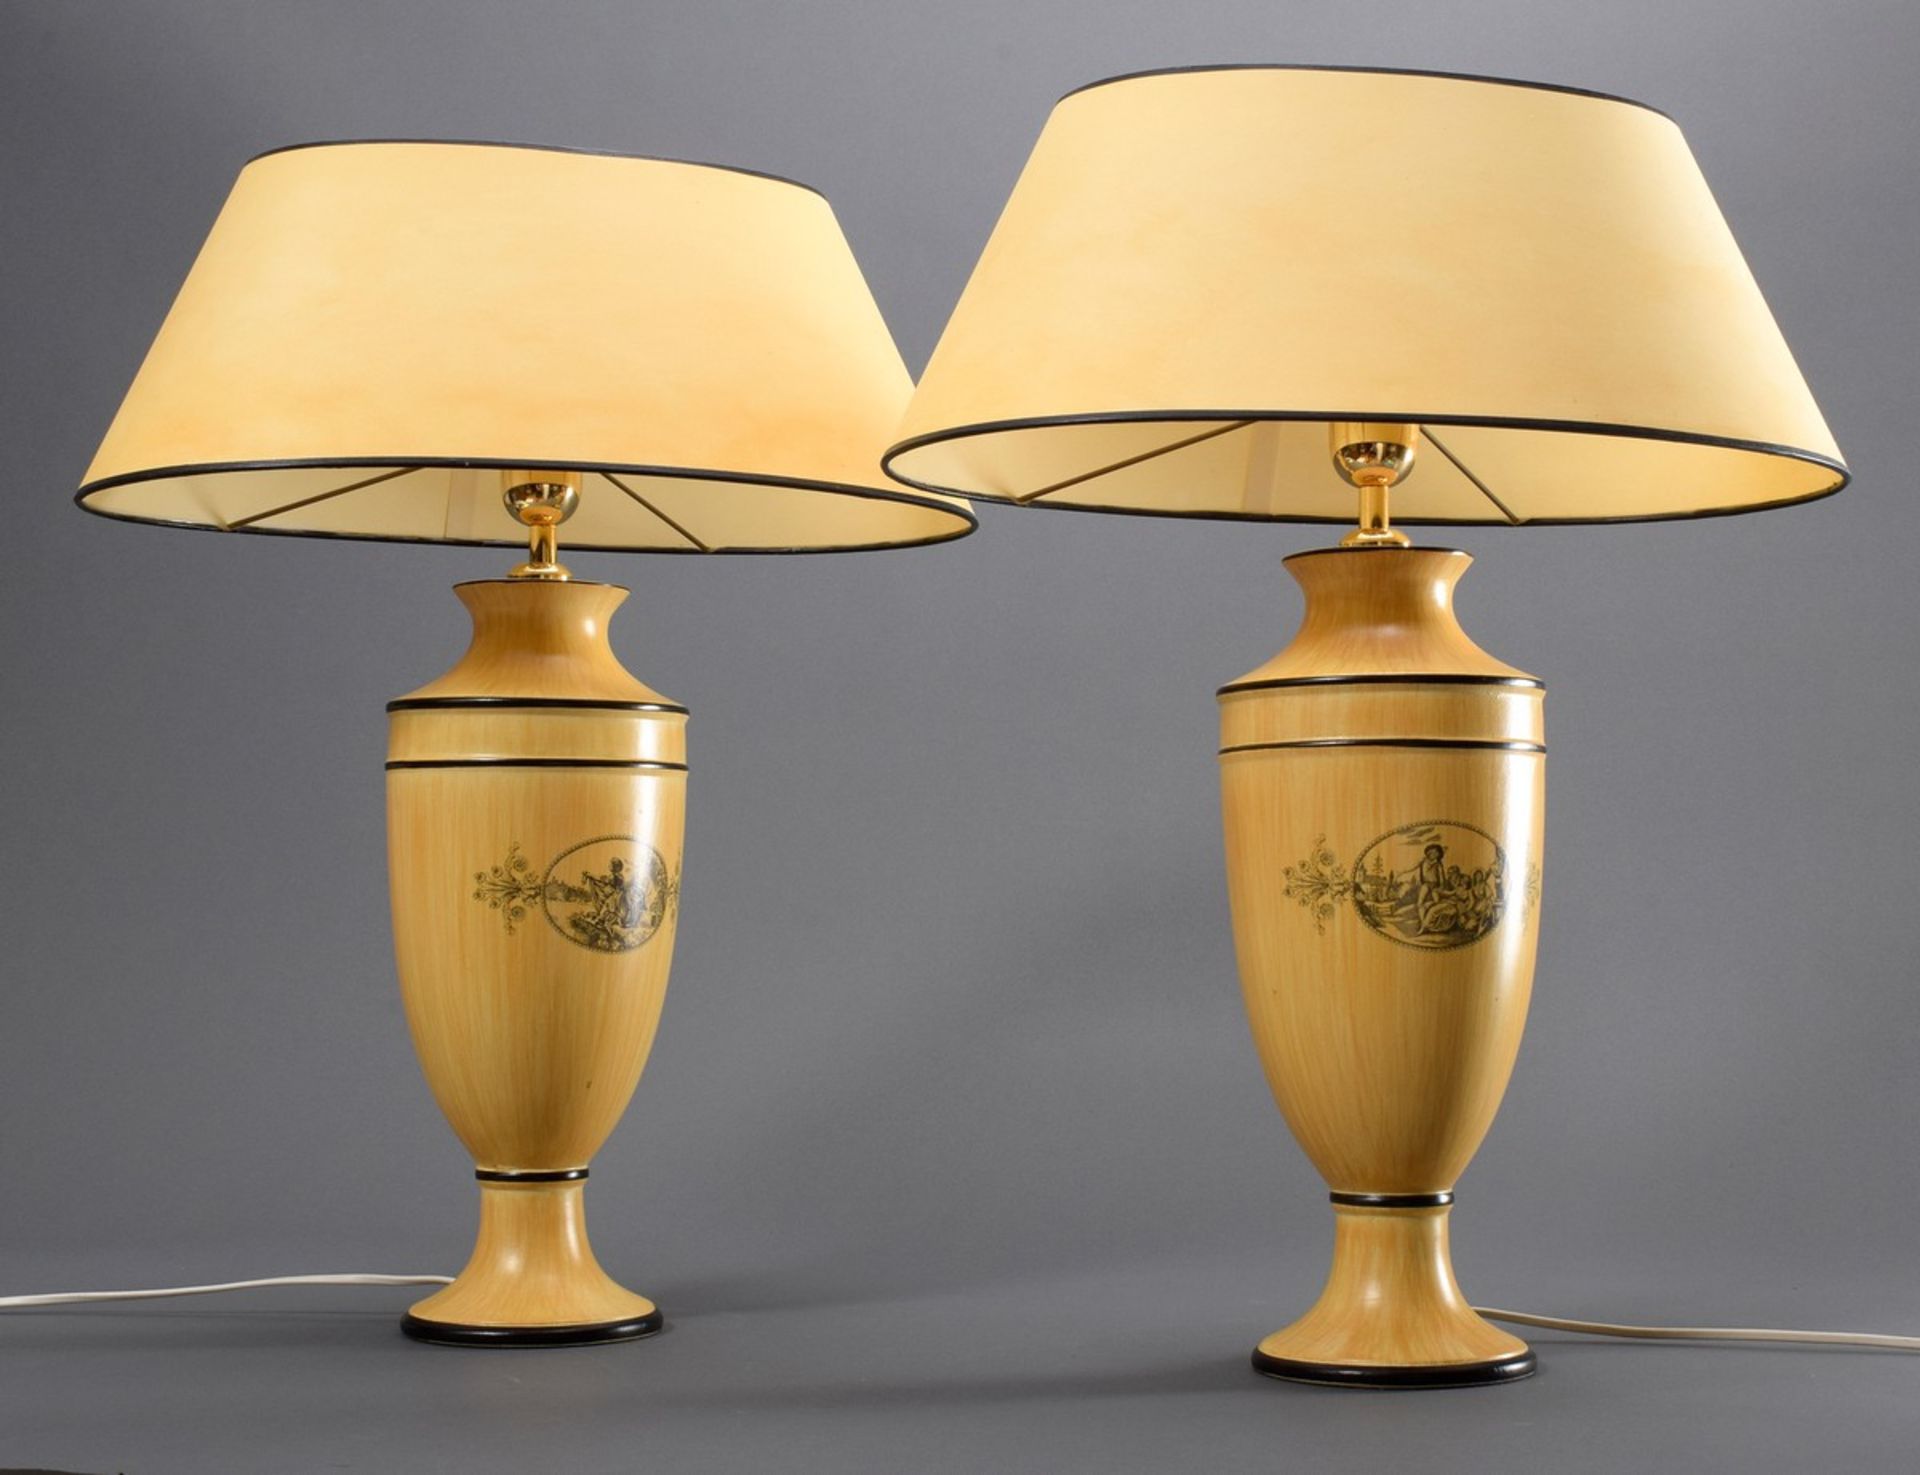 Pair of table lamps in wood trompe l'oeil in vase shape with black print decoration "Genre scene" b